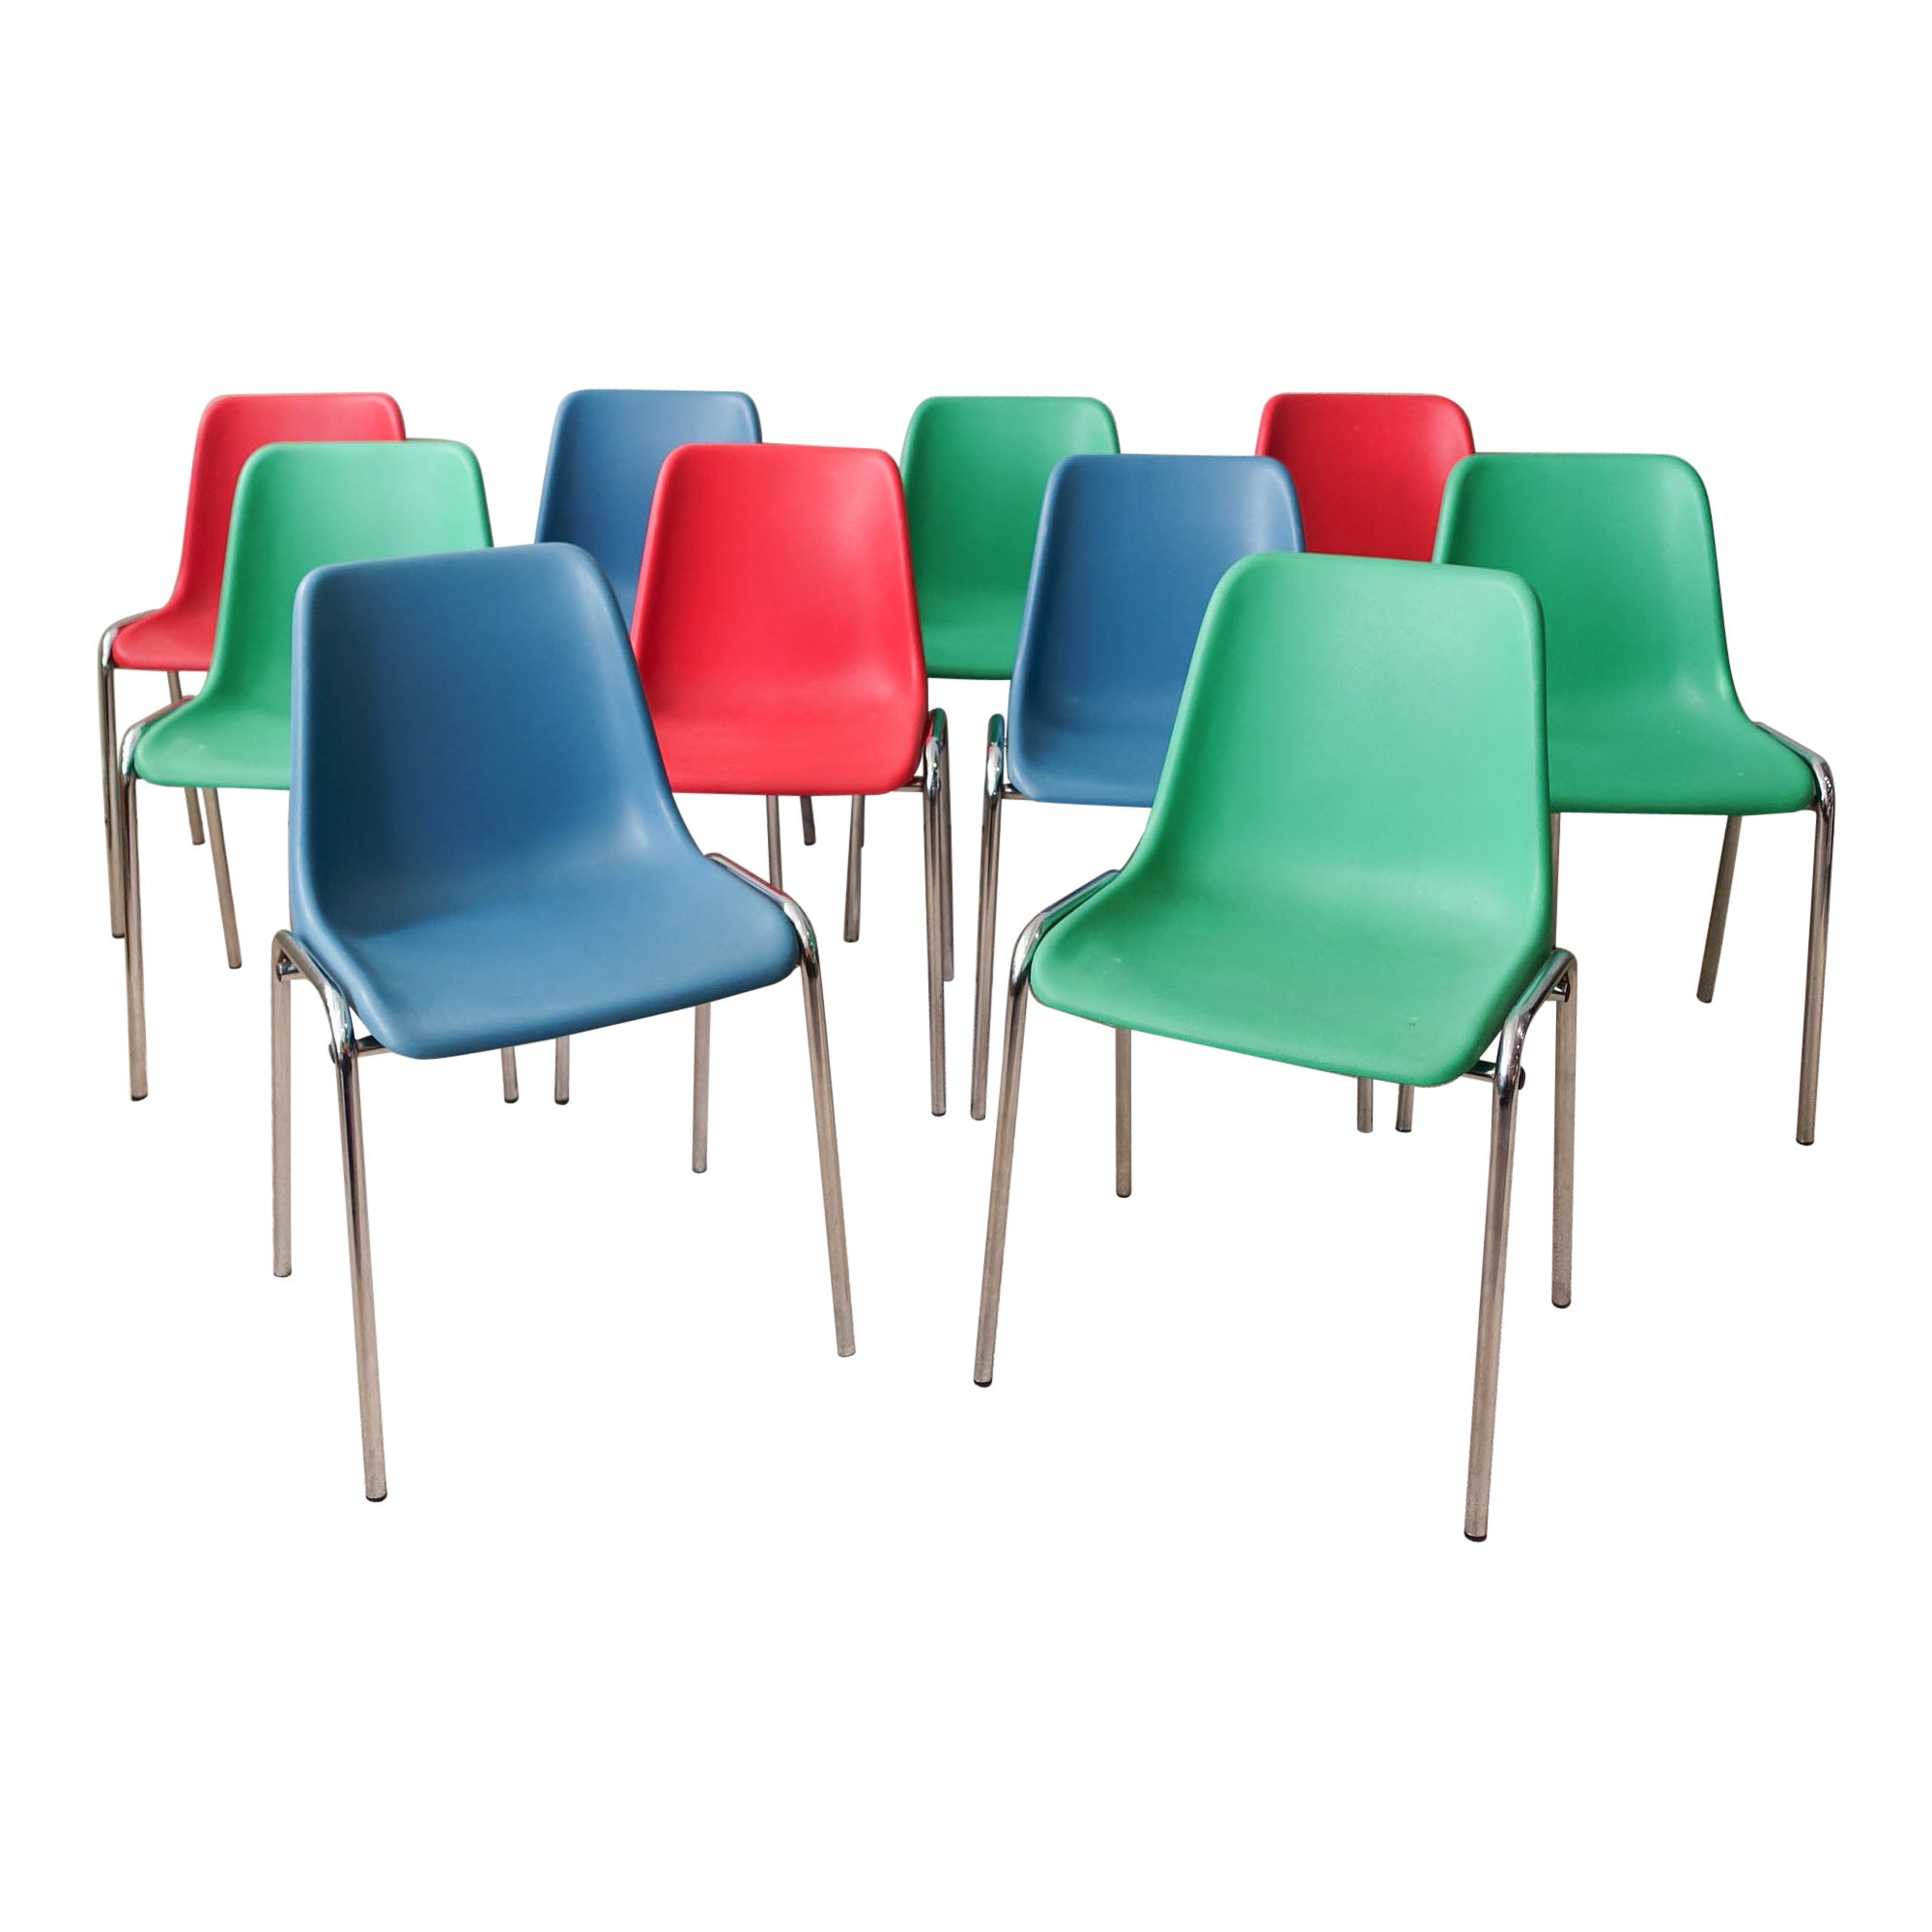 Set of 10 Multicolored Stackable Chairs in the Style of Helmut Starke, 1970s